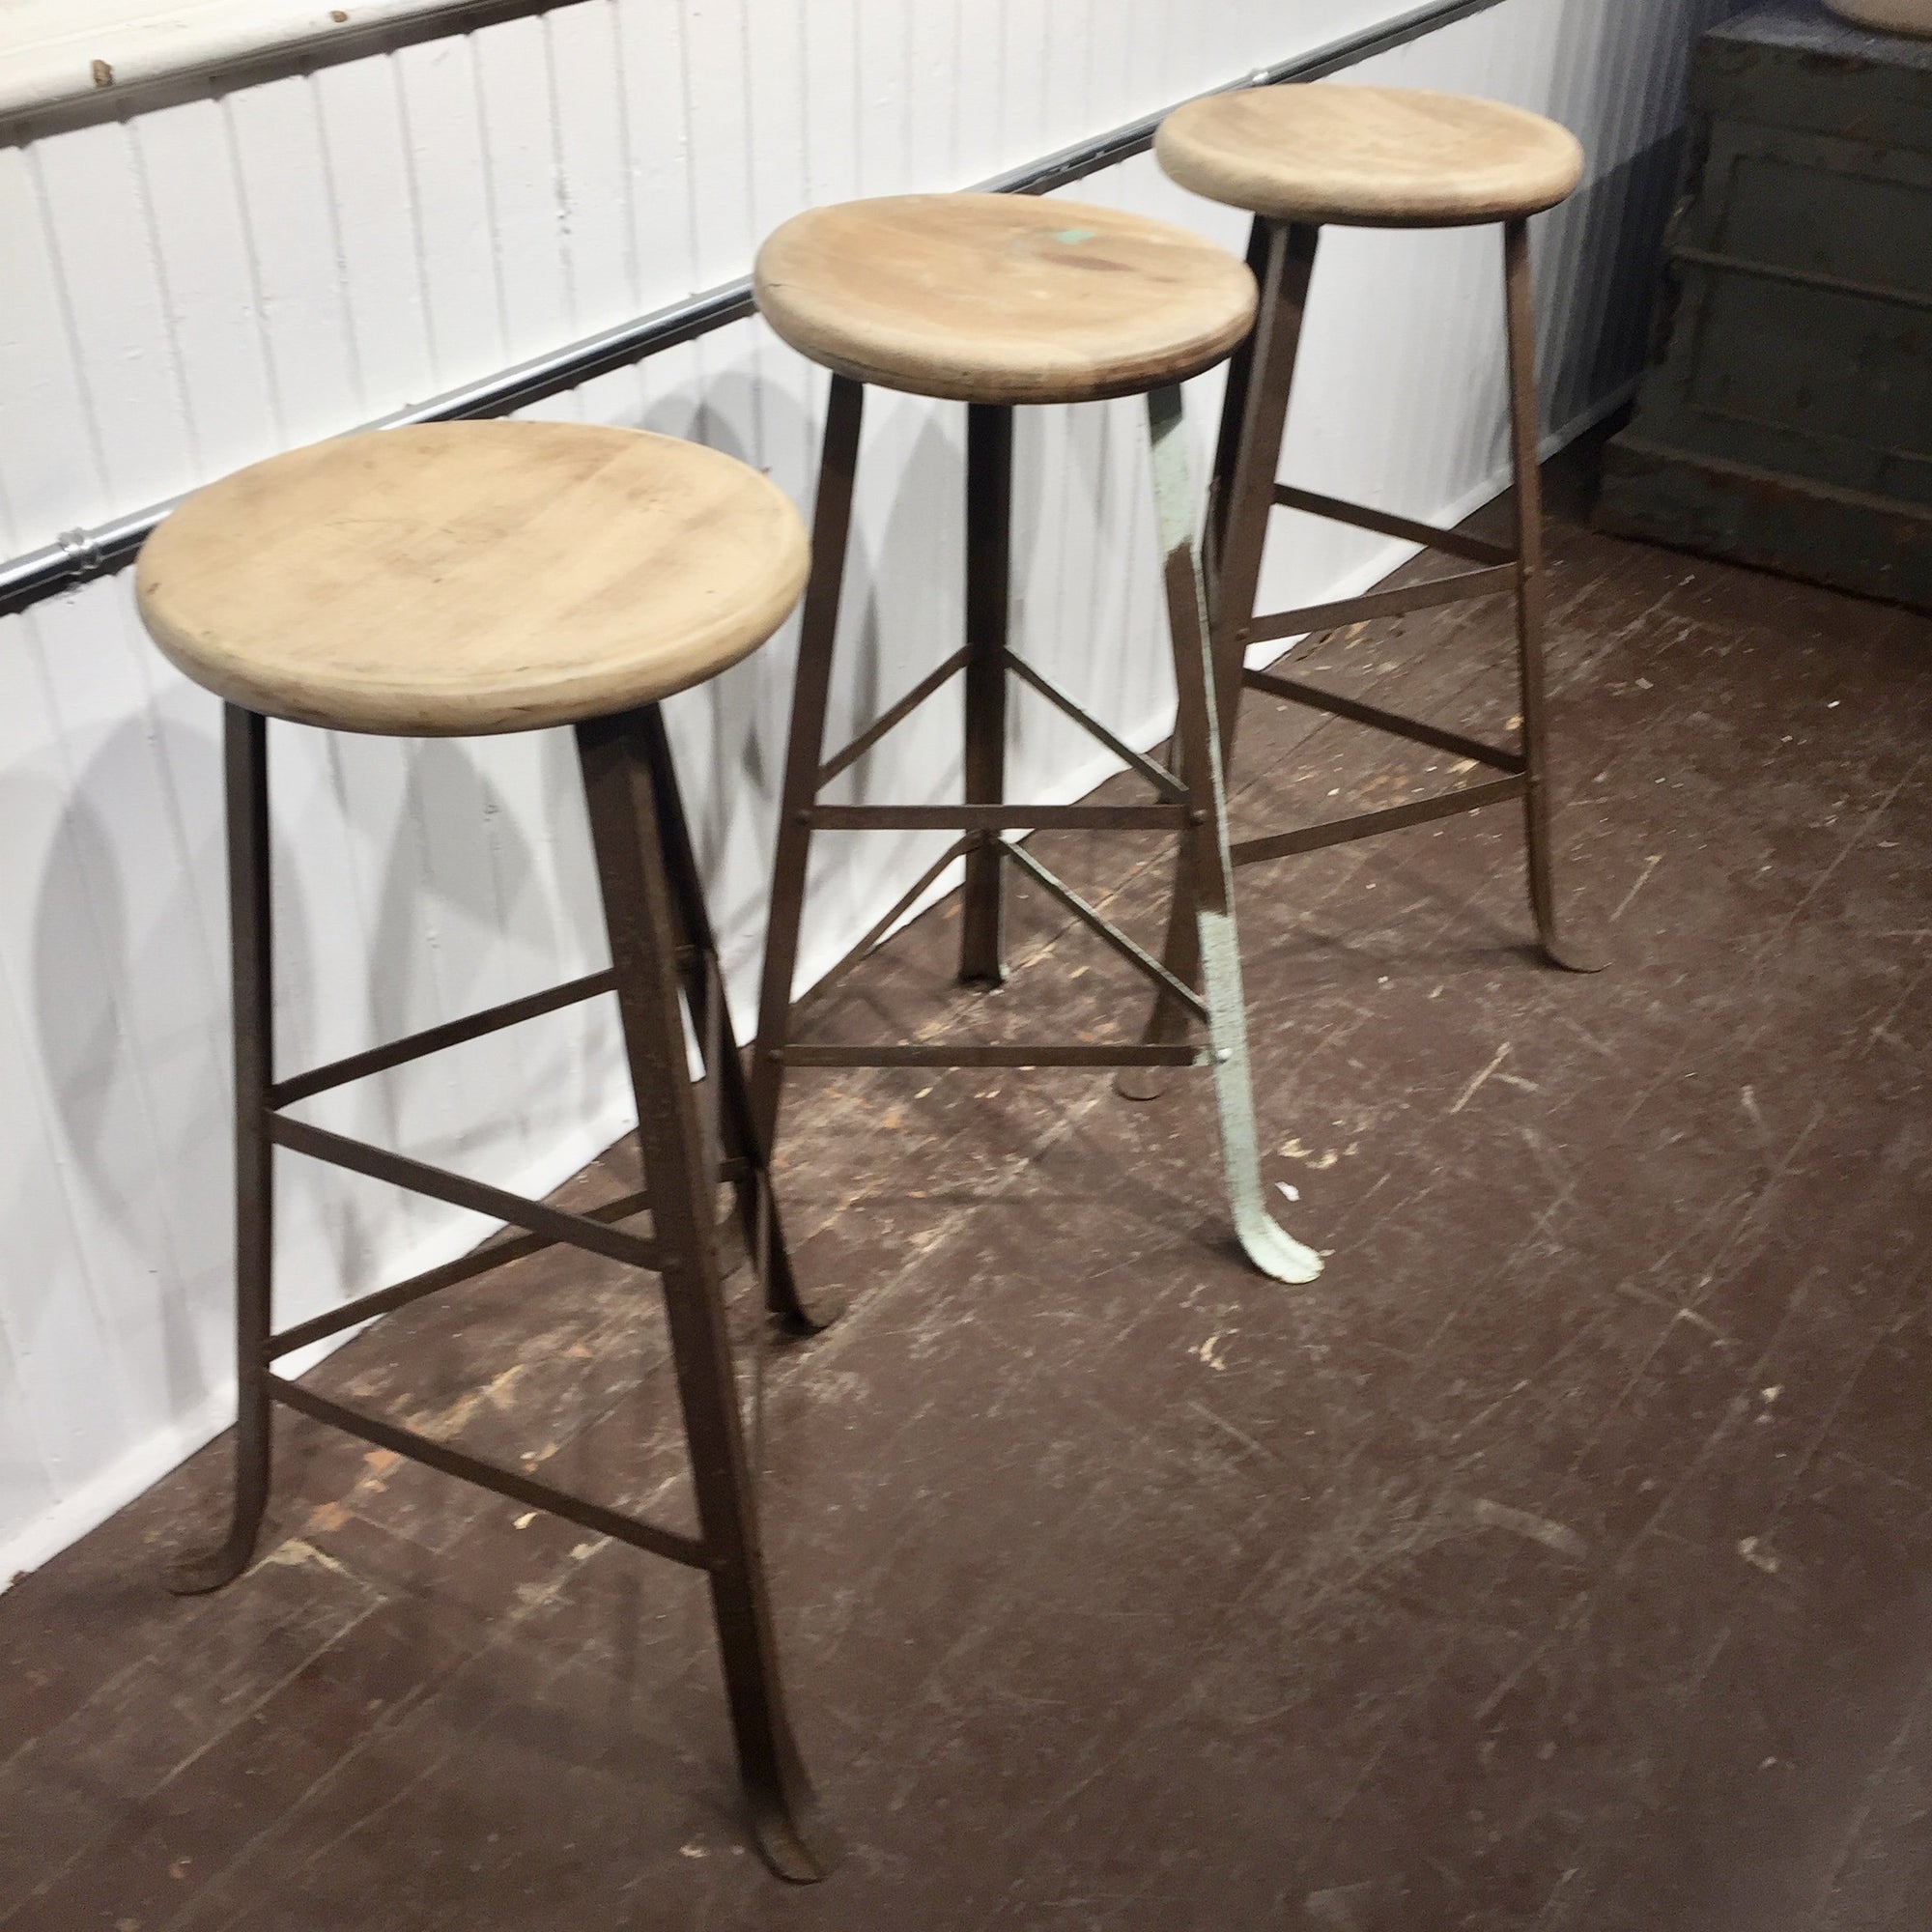 Industrial Stools by The Superior Way Salvage-Garden